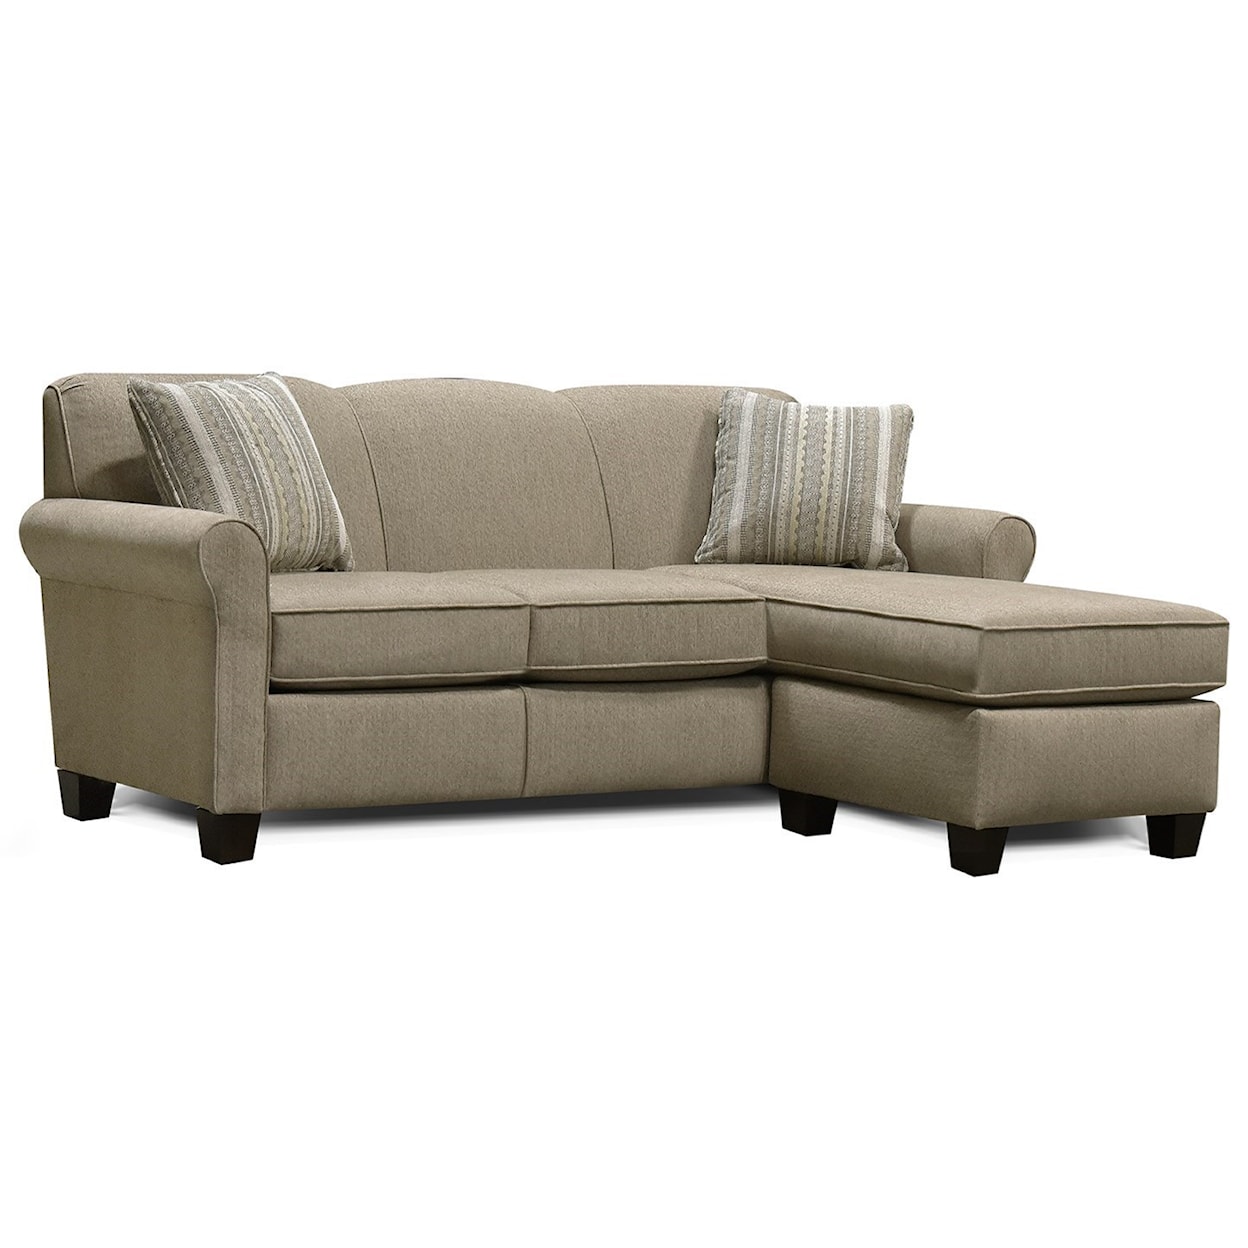 England 4630/LS Series Sectional Sofa with Floating Ottoman